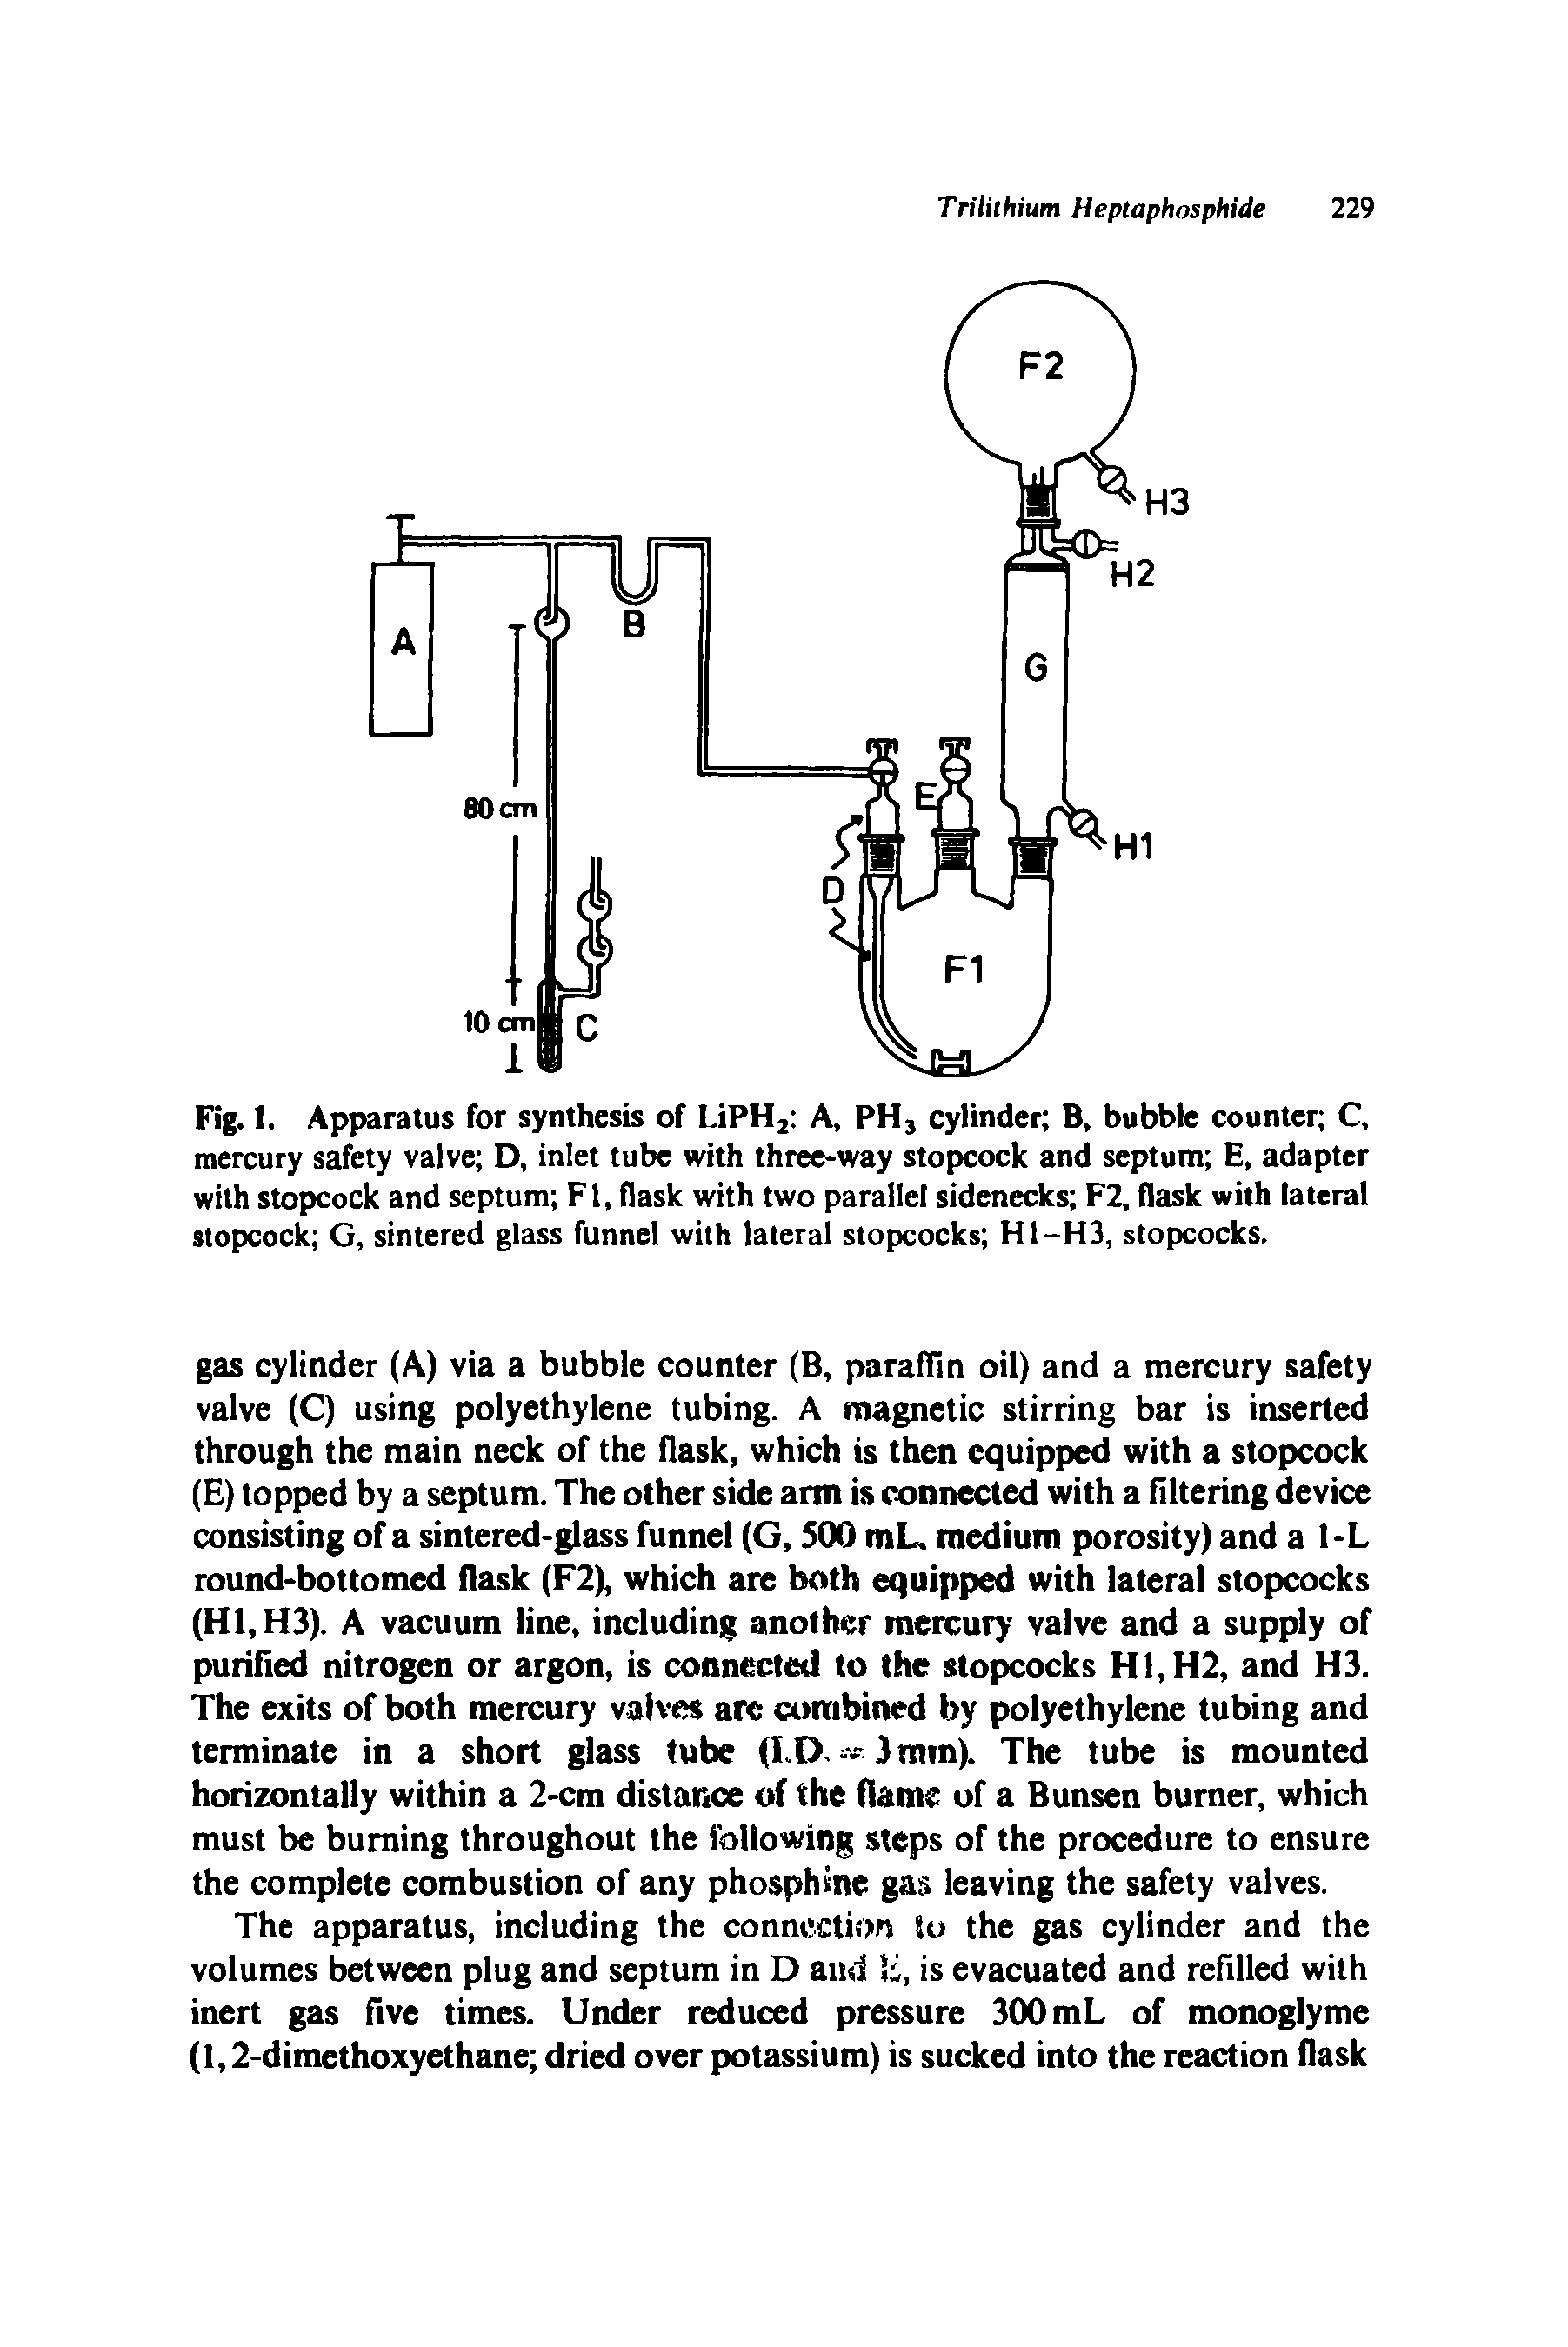 Fig. 1. Apparatus for synthesis of LiPHj A, PHj cylinder B, bubble counter C, mercury safety valve D, inlet tube with three-way stopcock and septum E, adapter with stopcock and septum FI, flask with two parallel sidenecks F2, flask with lateral stopcock G, sintered glass funnel with lateral stopcocks H1-H3, stopcocks.